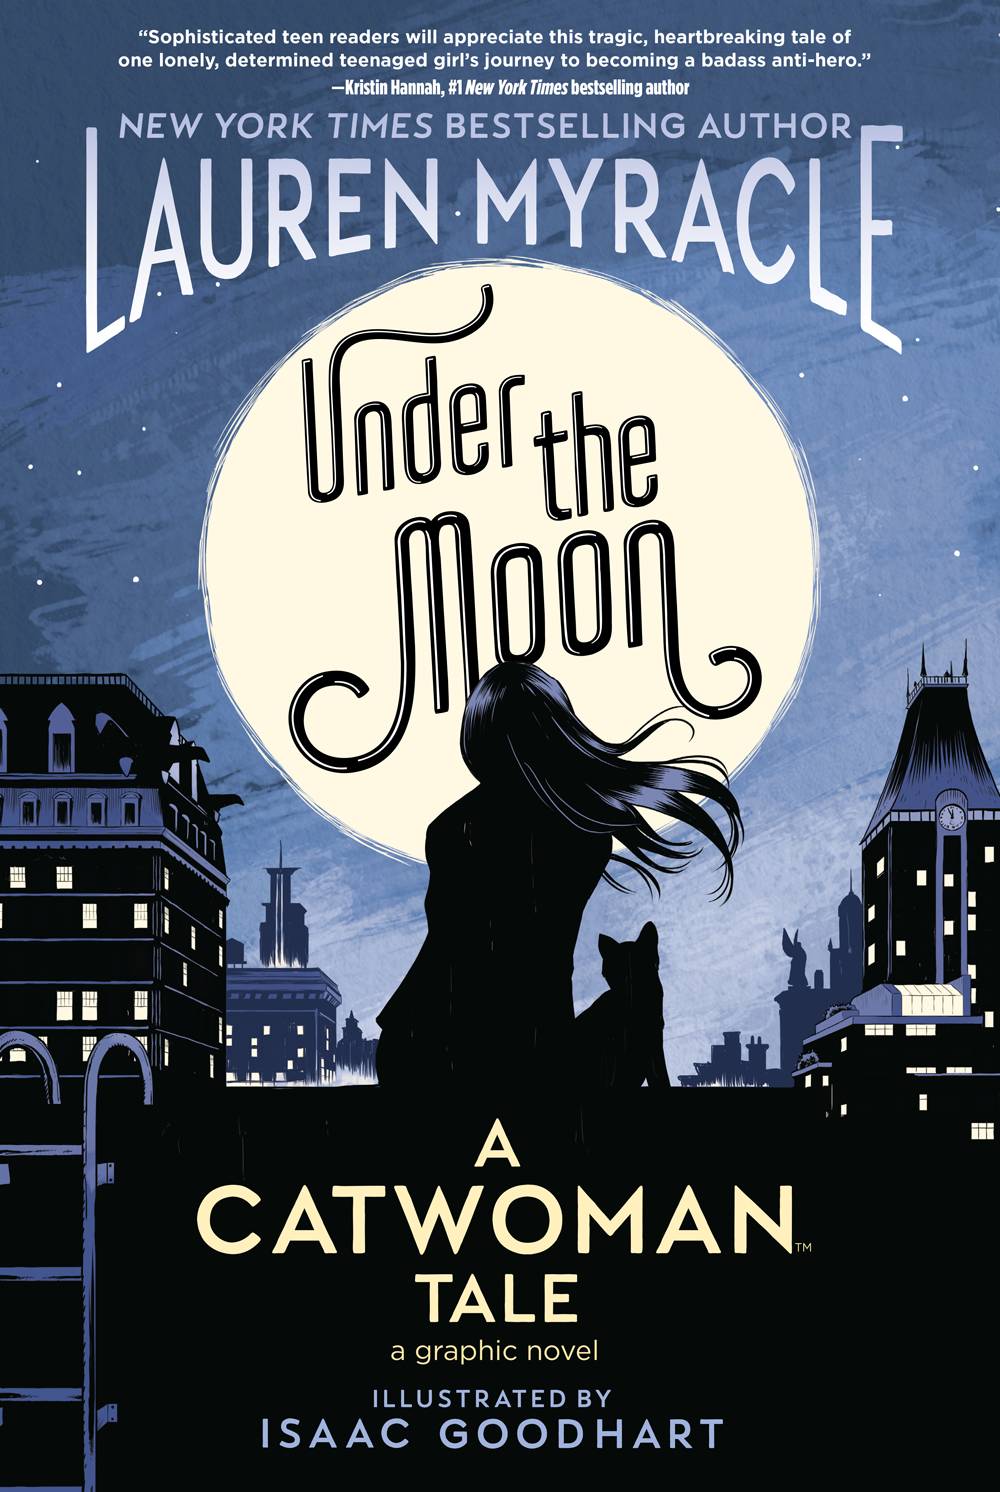 UNDER THE MOON A CATWOMAN TALE TP DC INK